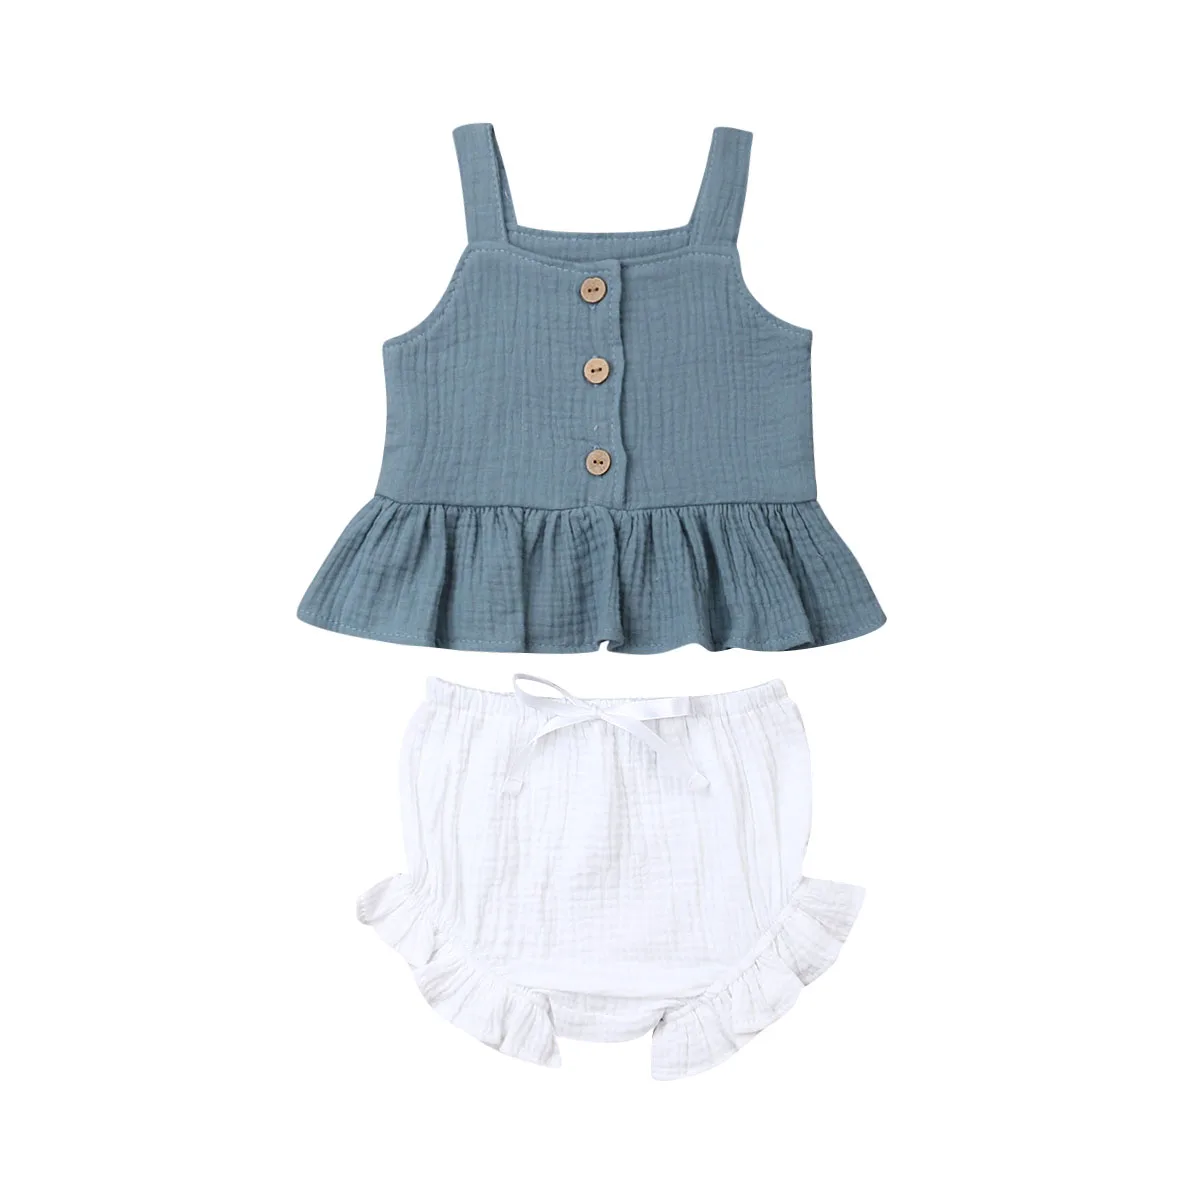 New 4Colors Summer Toddler Kids Baby Girls Cropped Tank Top Shorts Party Outfit 1-6 Years - Цвет: 4